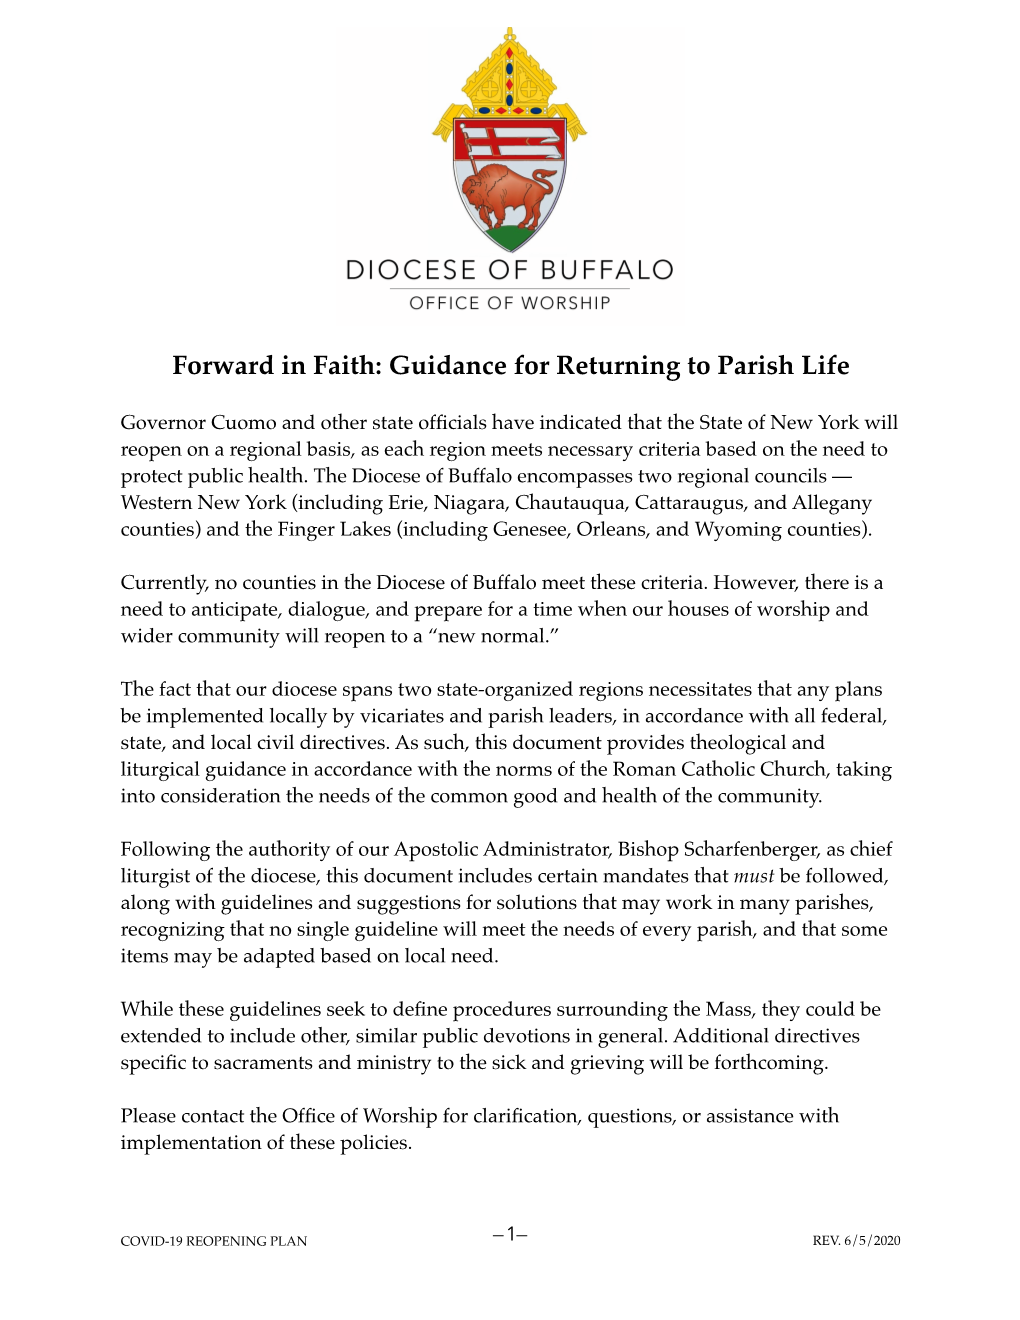 Forward in Faith: Guidance for Returning to Parish Life